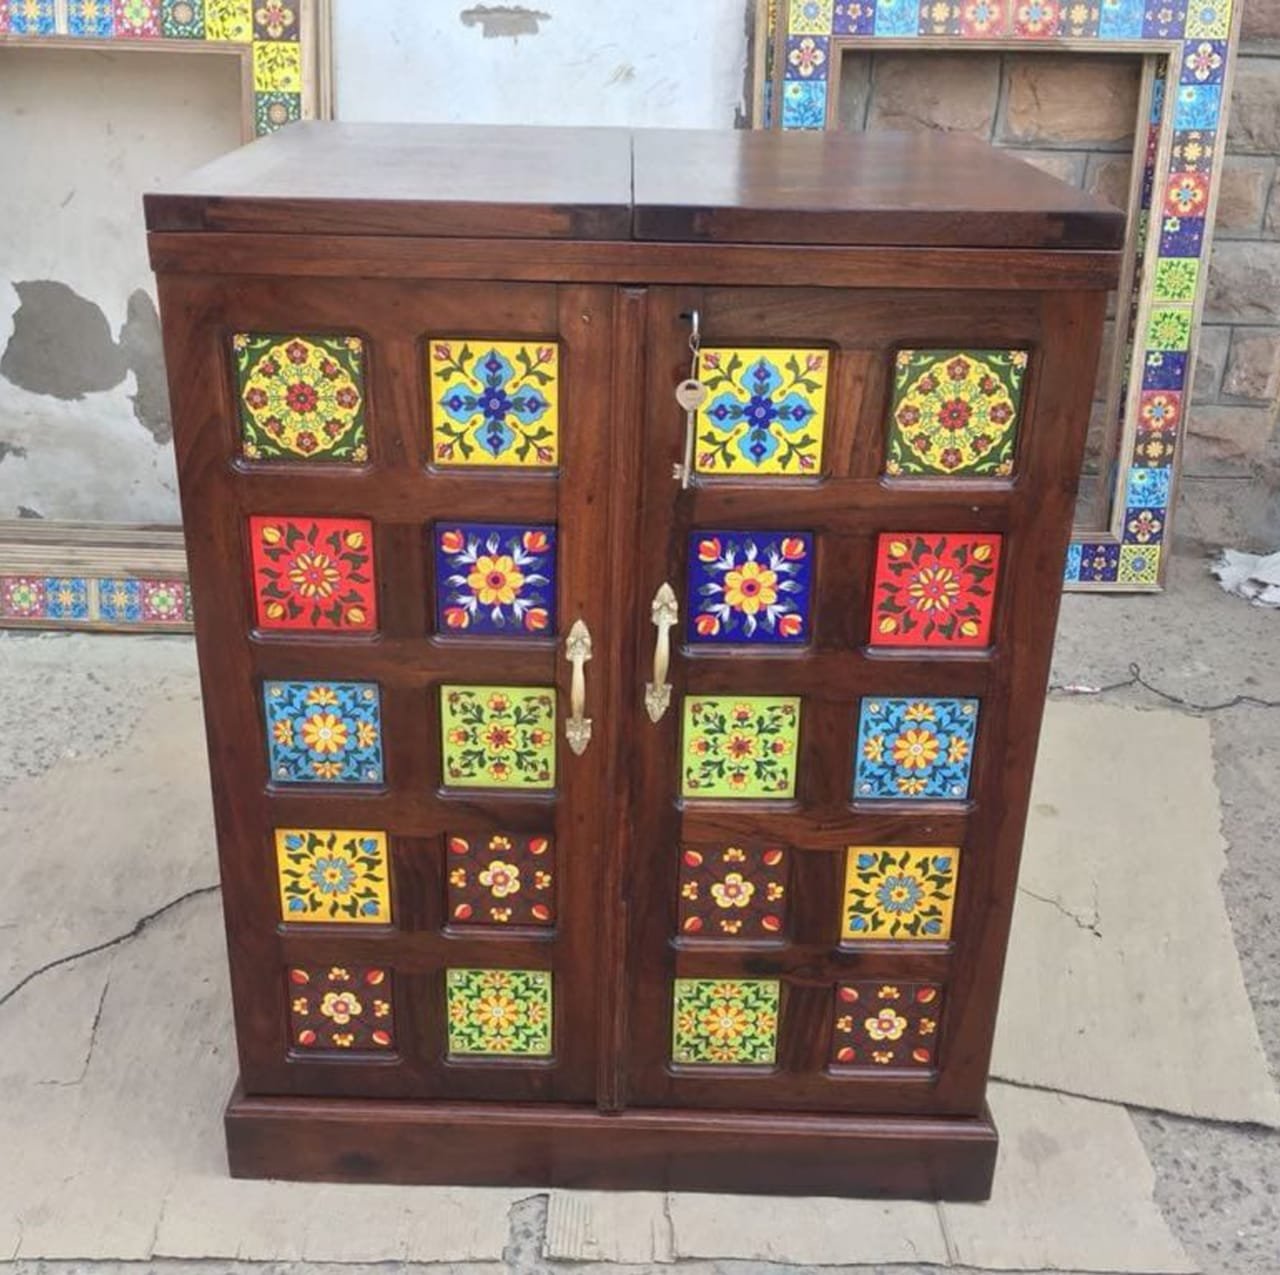 solid wood bar cabinet